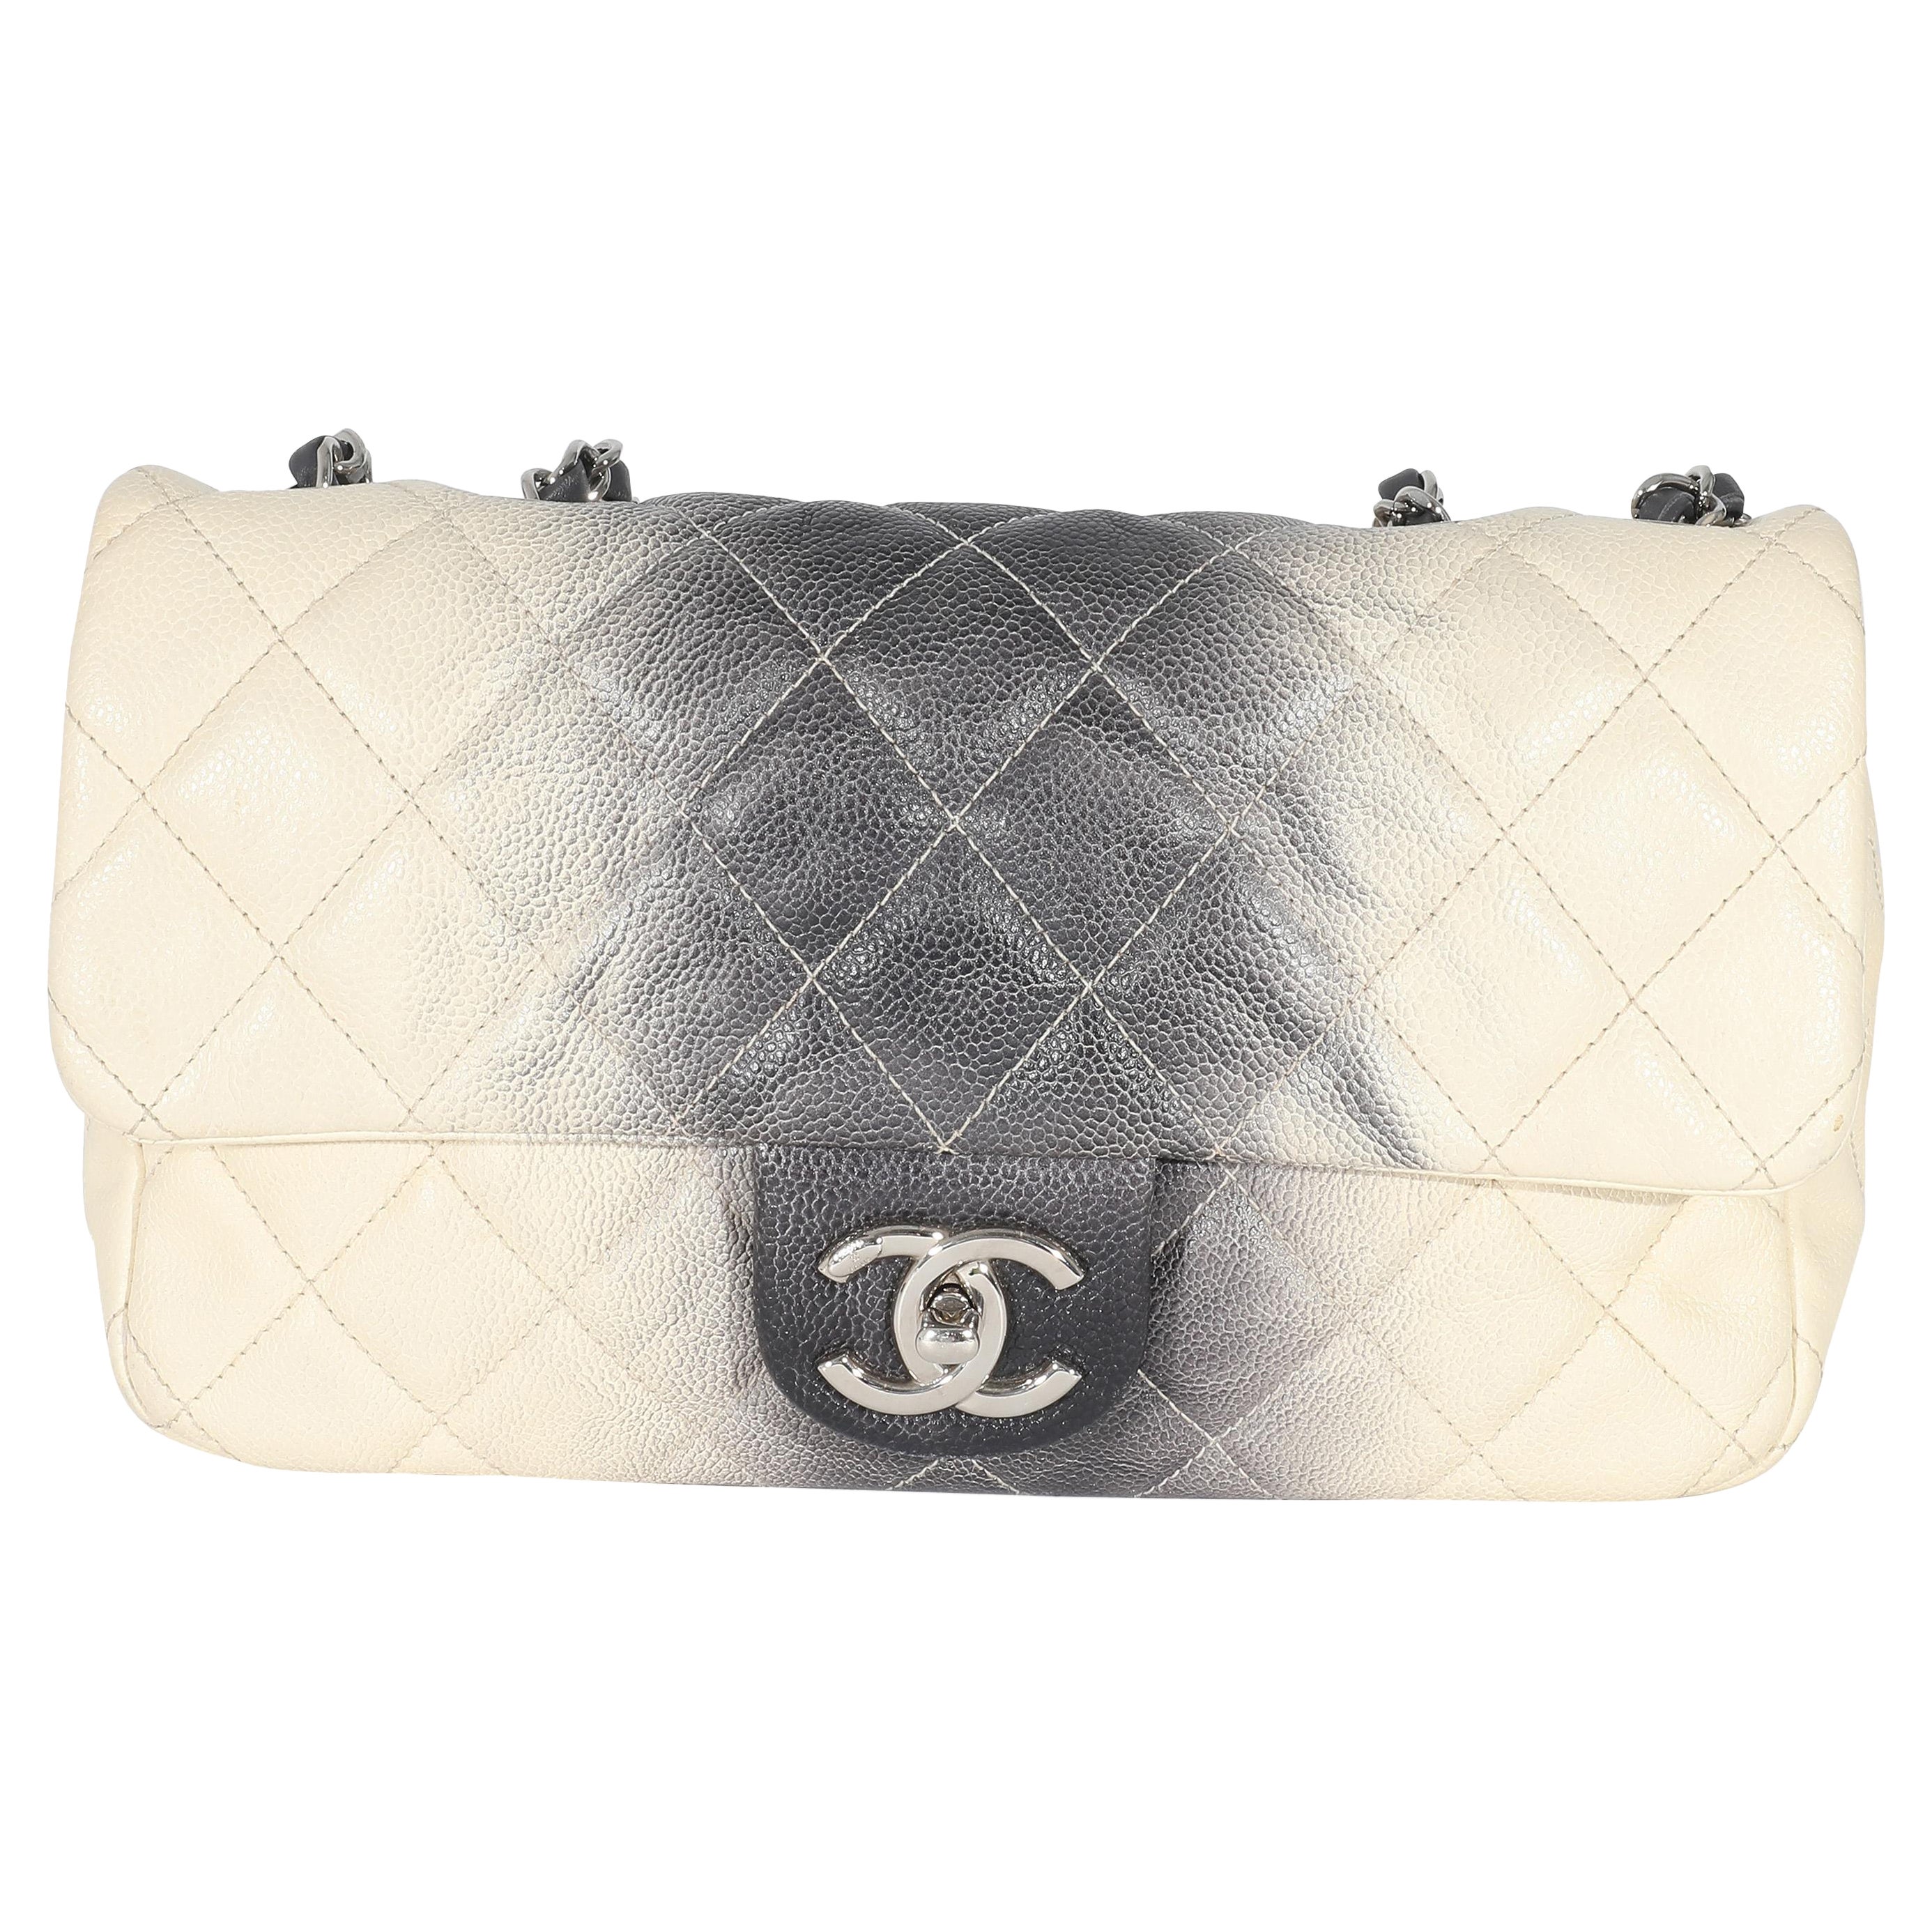 Chanel Ombre - 38 For Sale on 1stDibs  chanel ombre boy bag, ombre chanel, chanel  ombre crystal bag